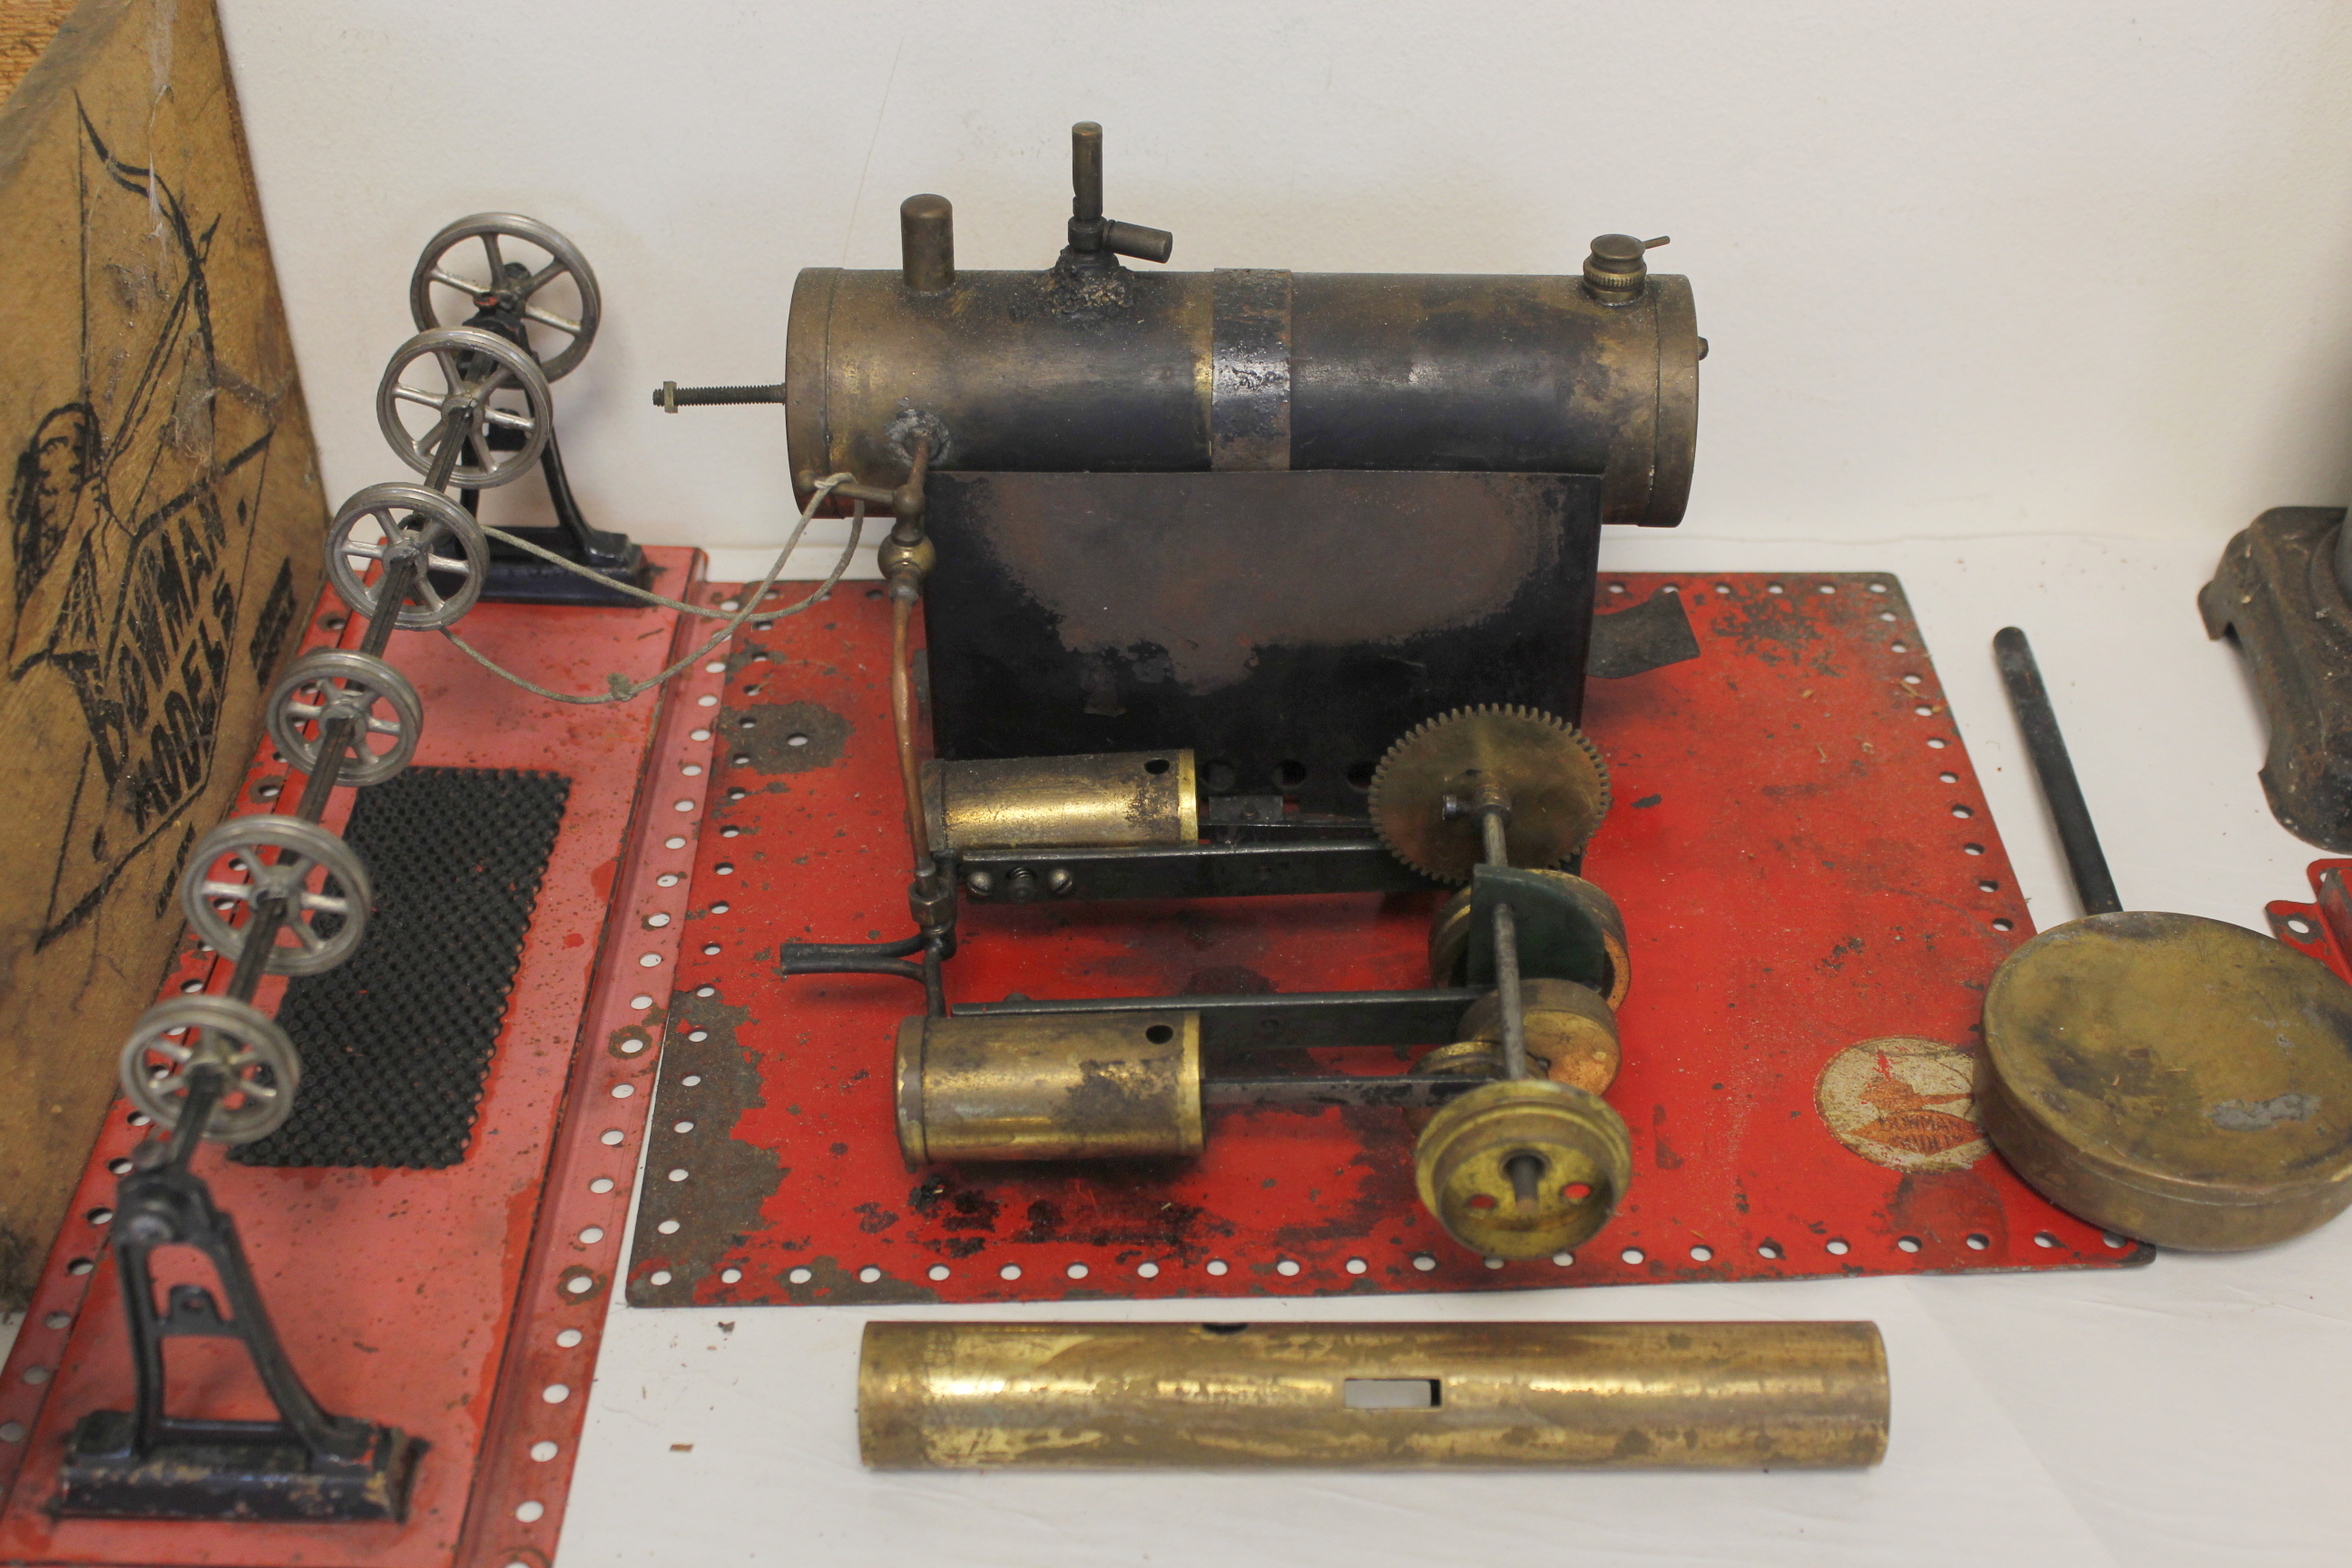 Vintage 1920s/30s Bowman model steam engine to include a japanned steel and brass boiler, - Image 2 of 6